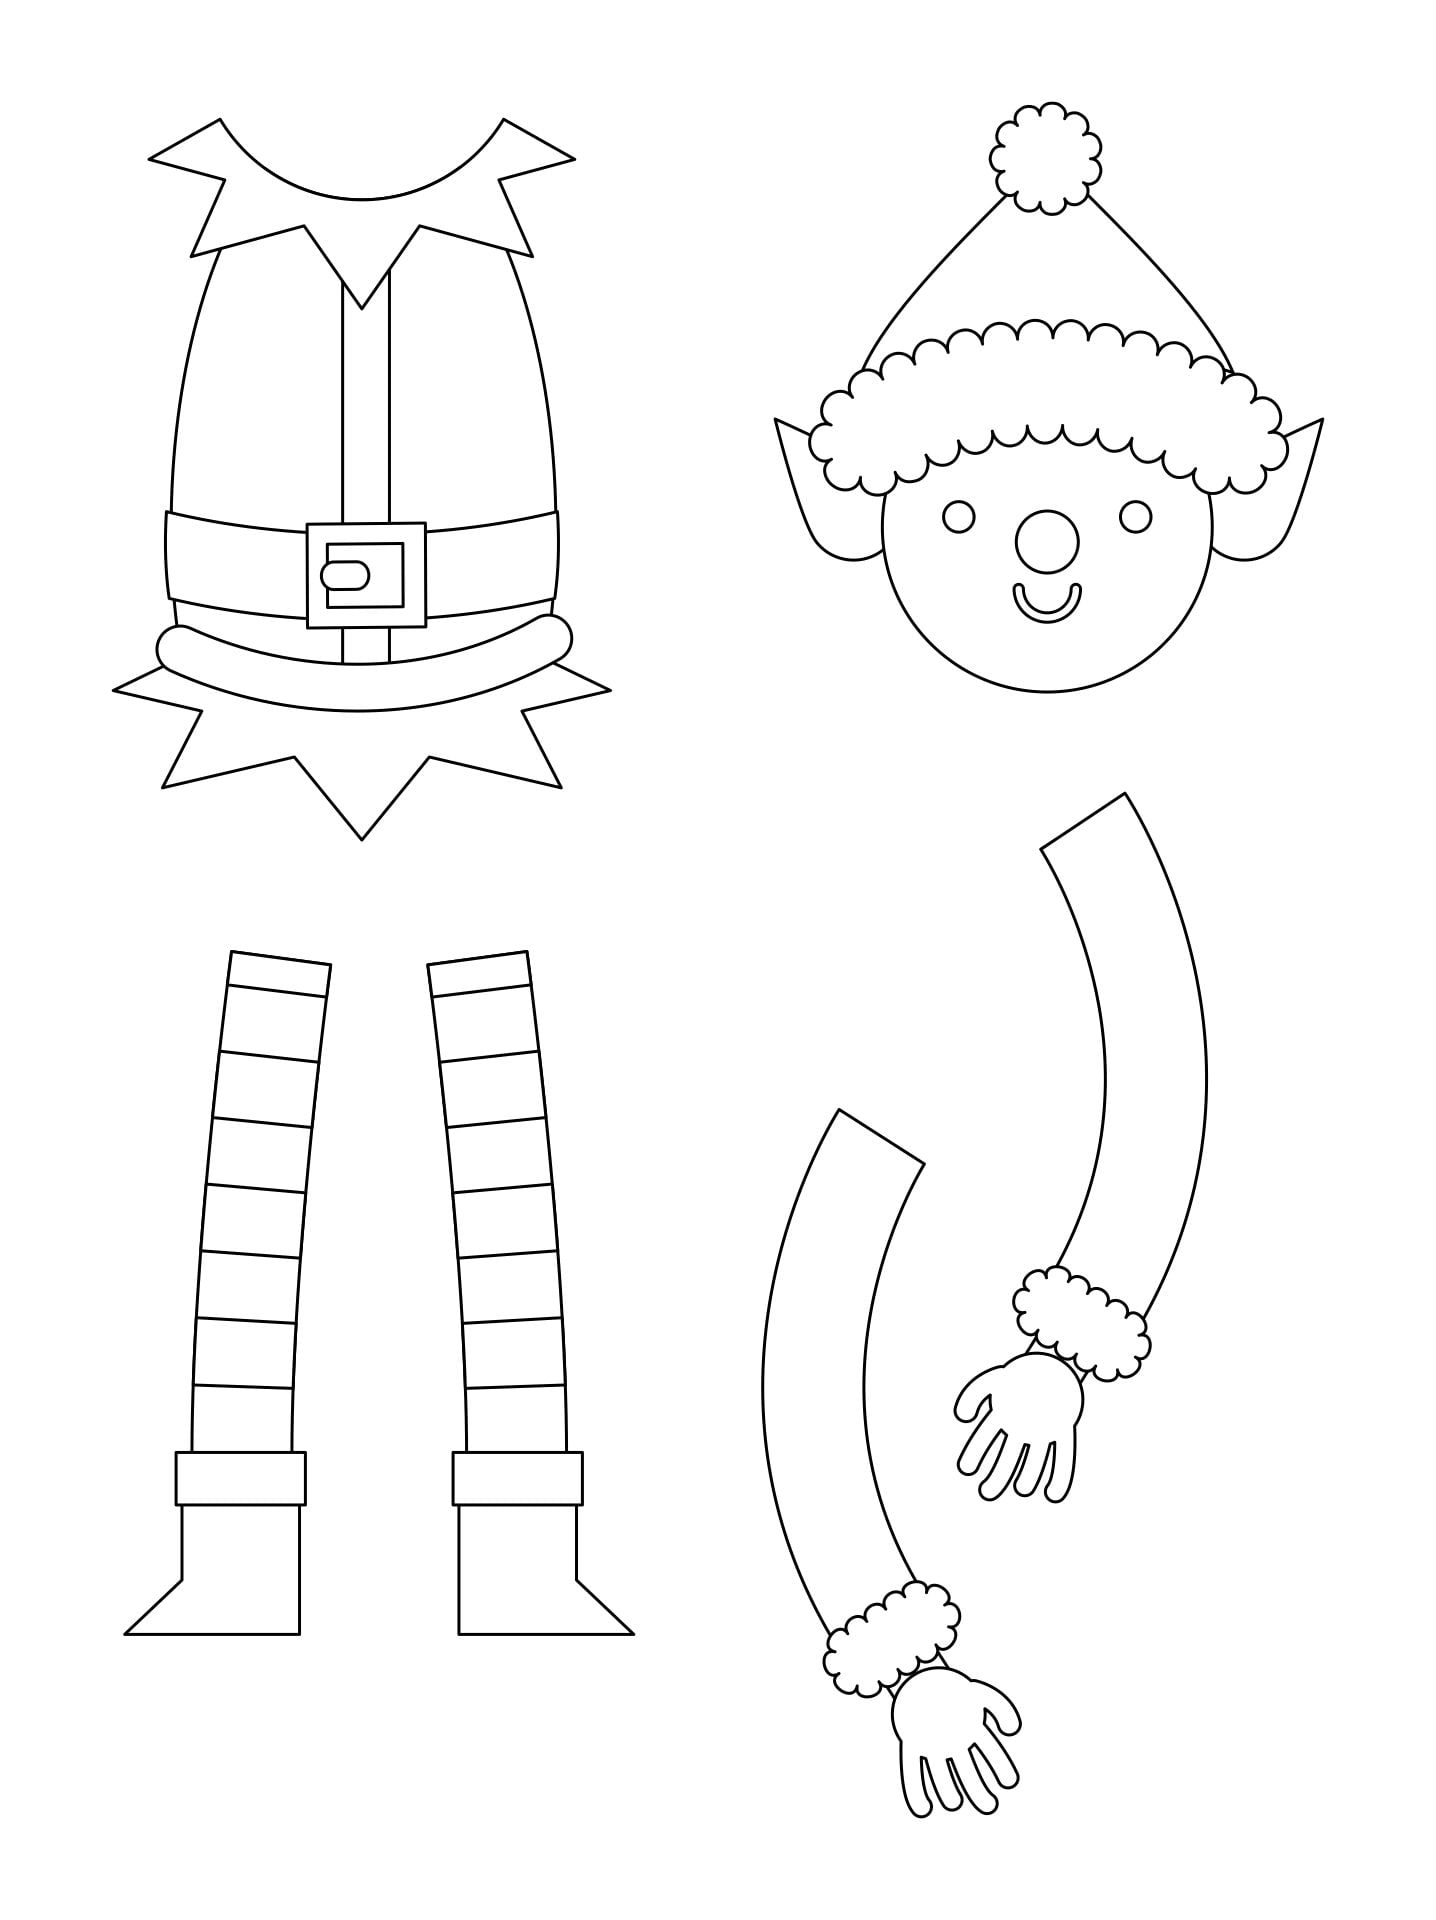 cut-out-printable-elf-template-free-printable